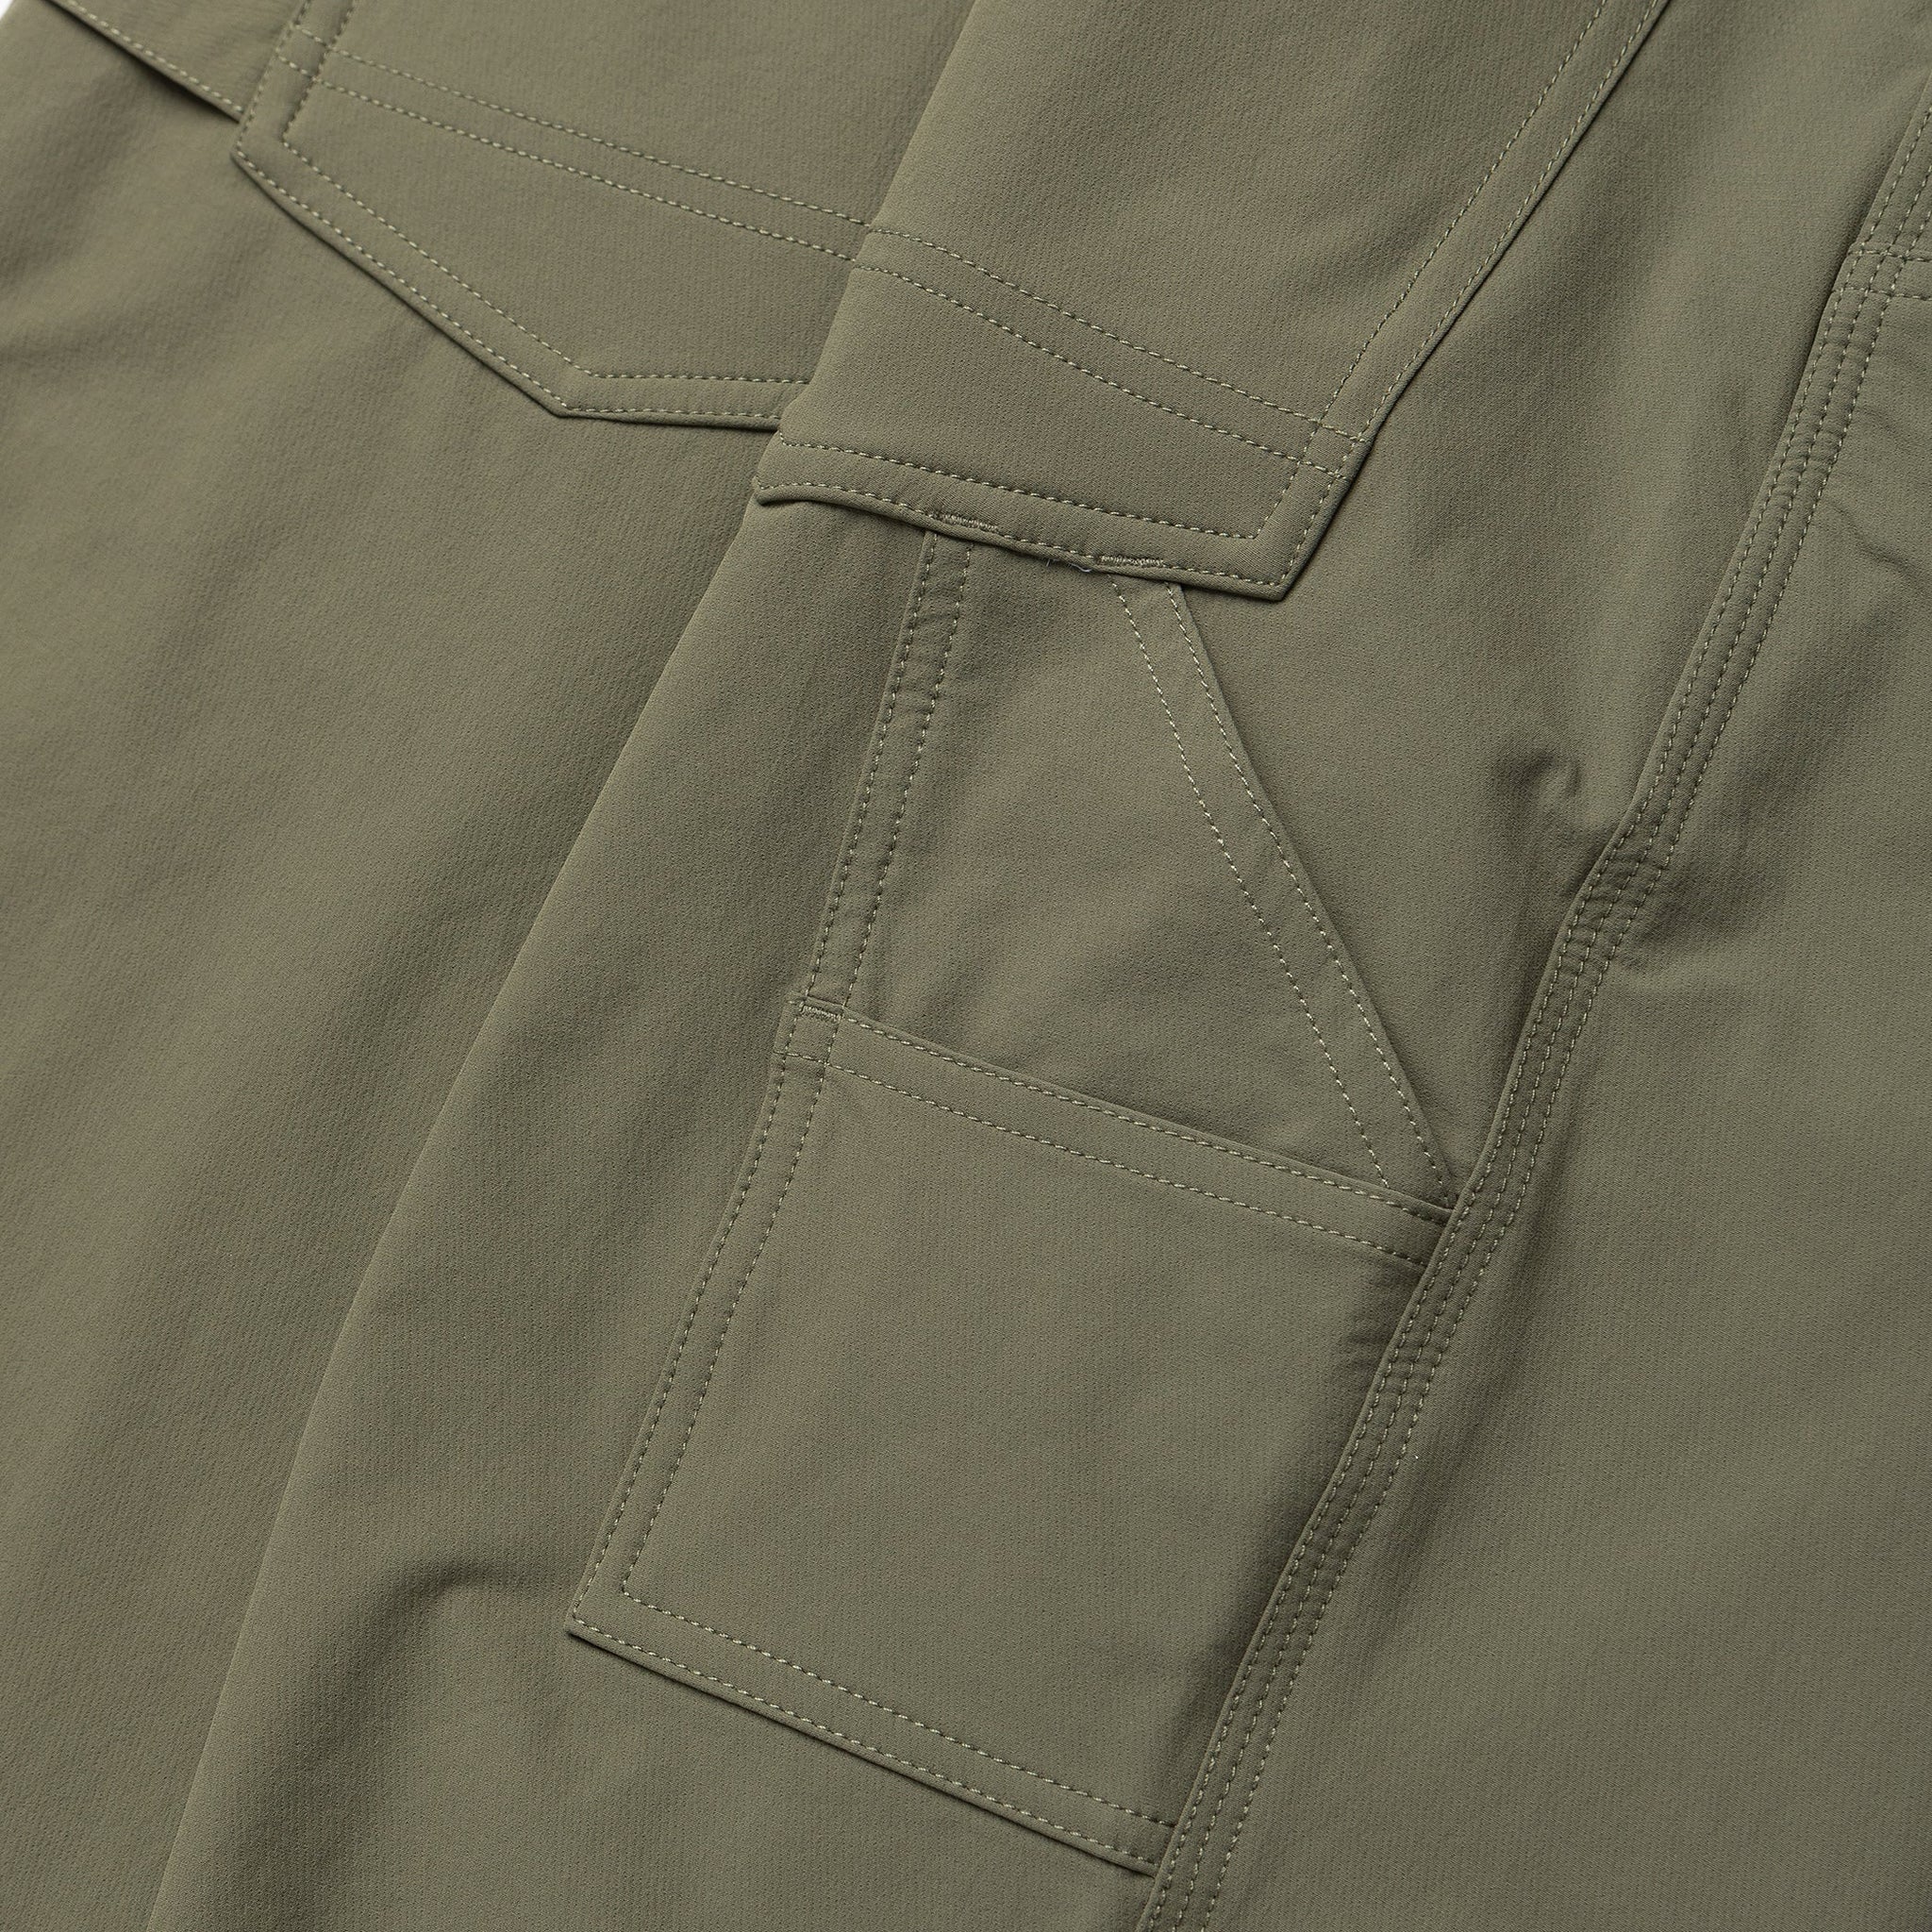 Seager Bison Tech Trail Pant Military Green Nylon Stretch Kempt Mens Clothing Athens Georgia